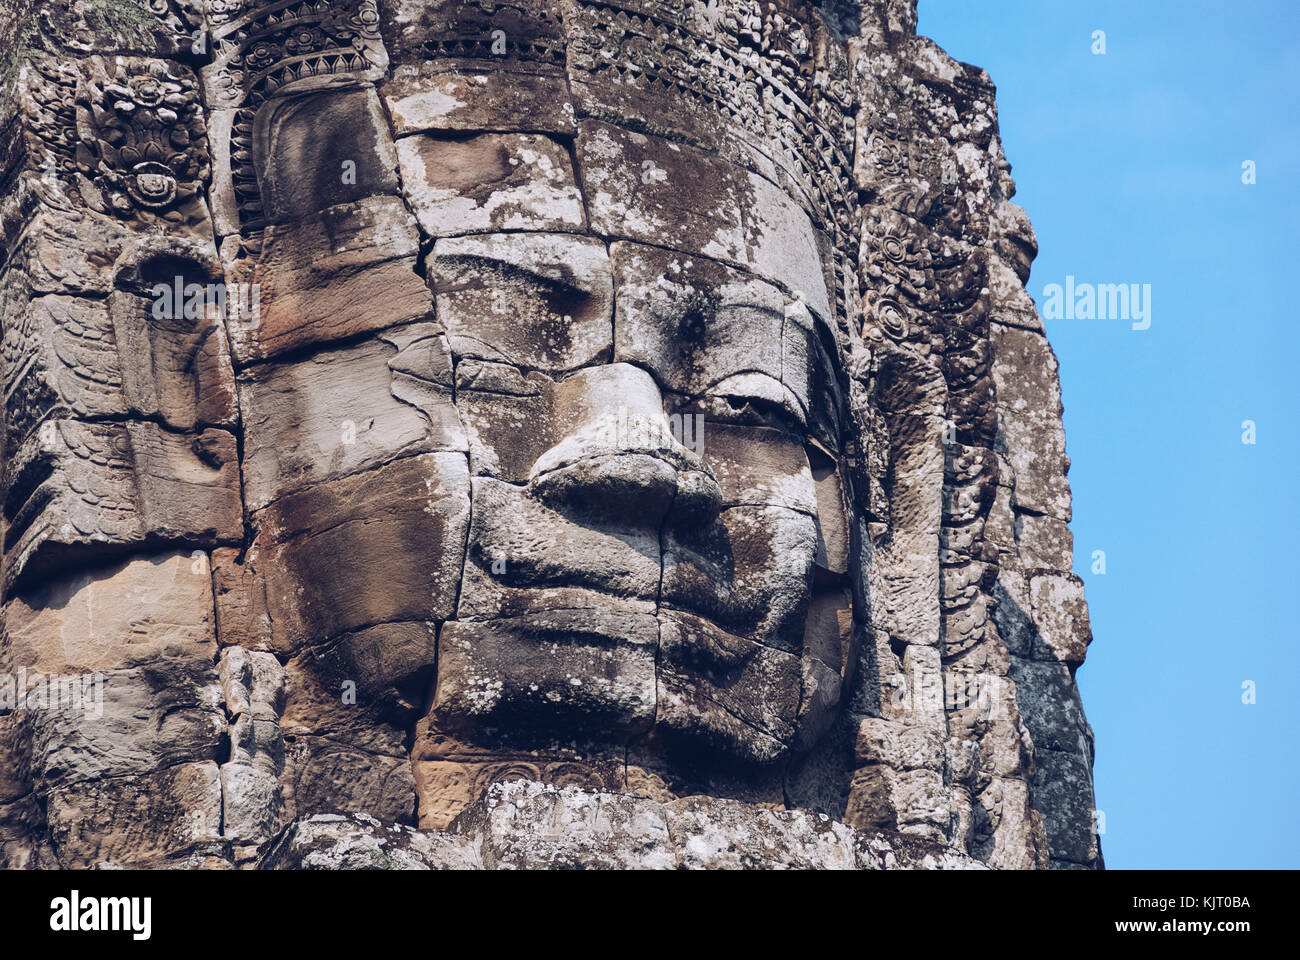 One of the giant faces at Angkor Thom, Cambodia. Stock Photo